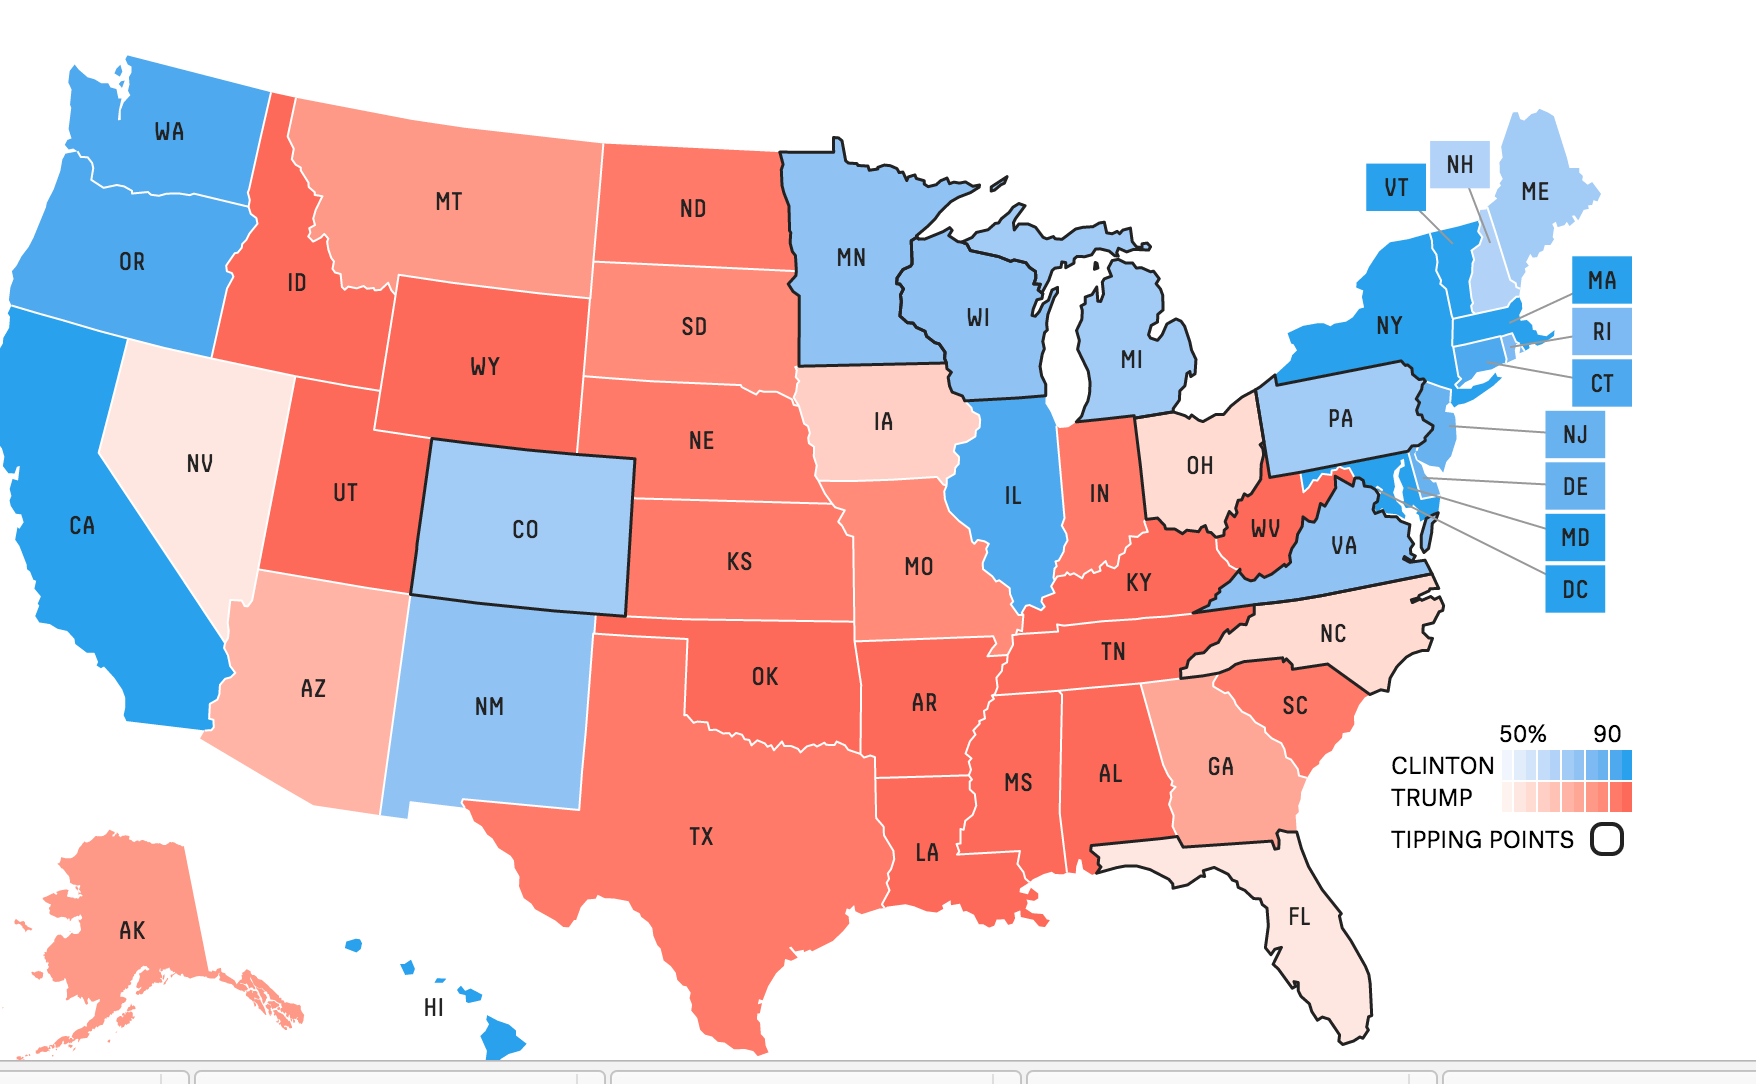 Maryland Now the Bluest of Blue States, Alabama the Reddest of the Red